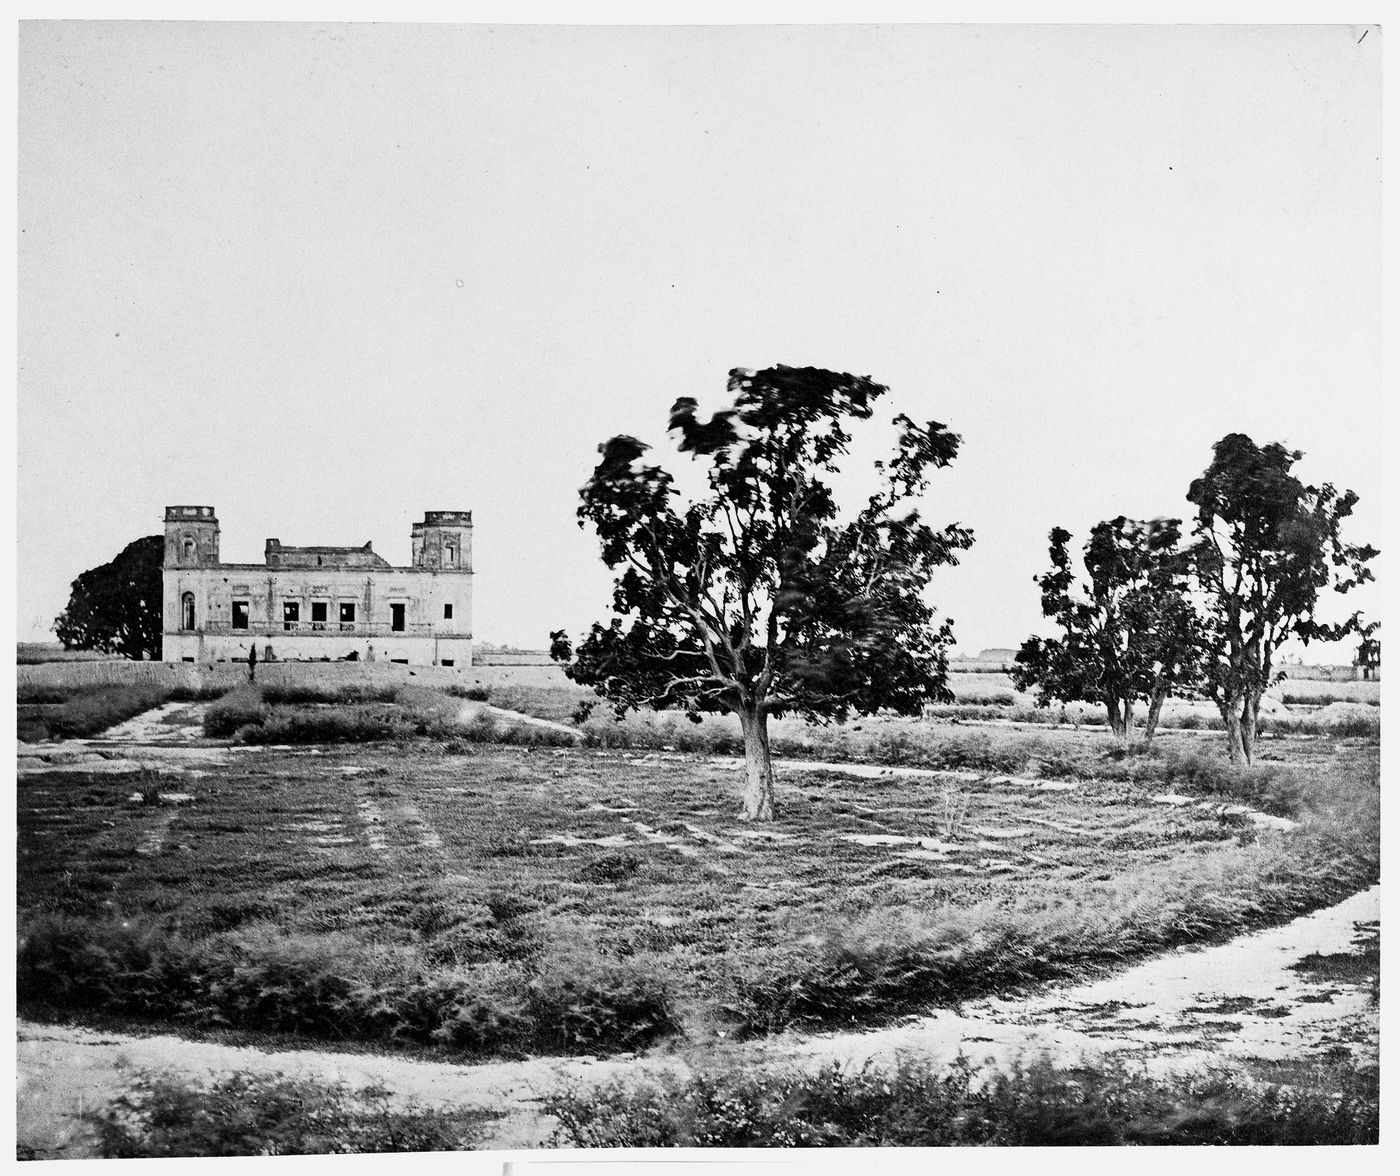 View of the burial site of Major General Sir Henry Havelock showing the ruins of the mansion of the Alam Bagh [World's Garden complex] in the background, near Lucknow, India